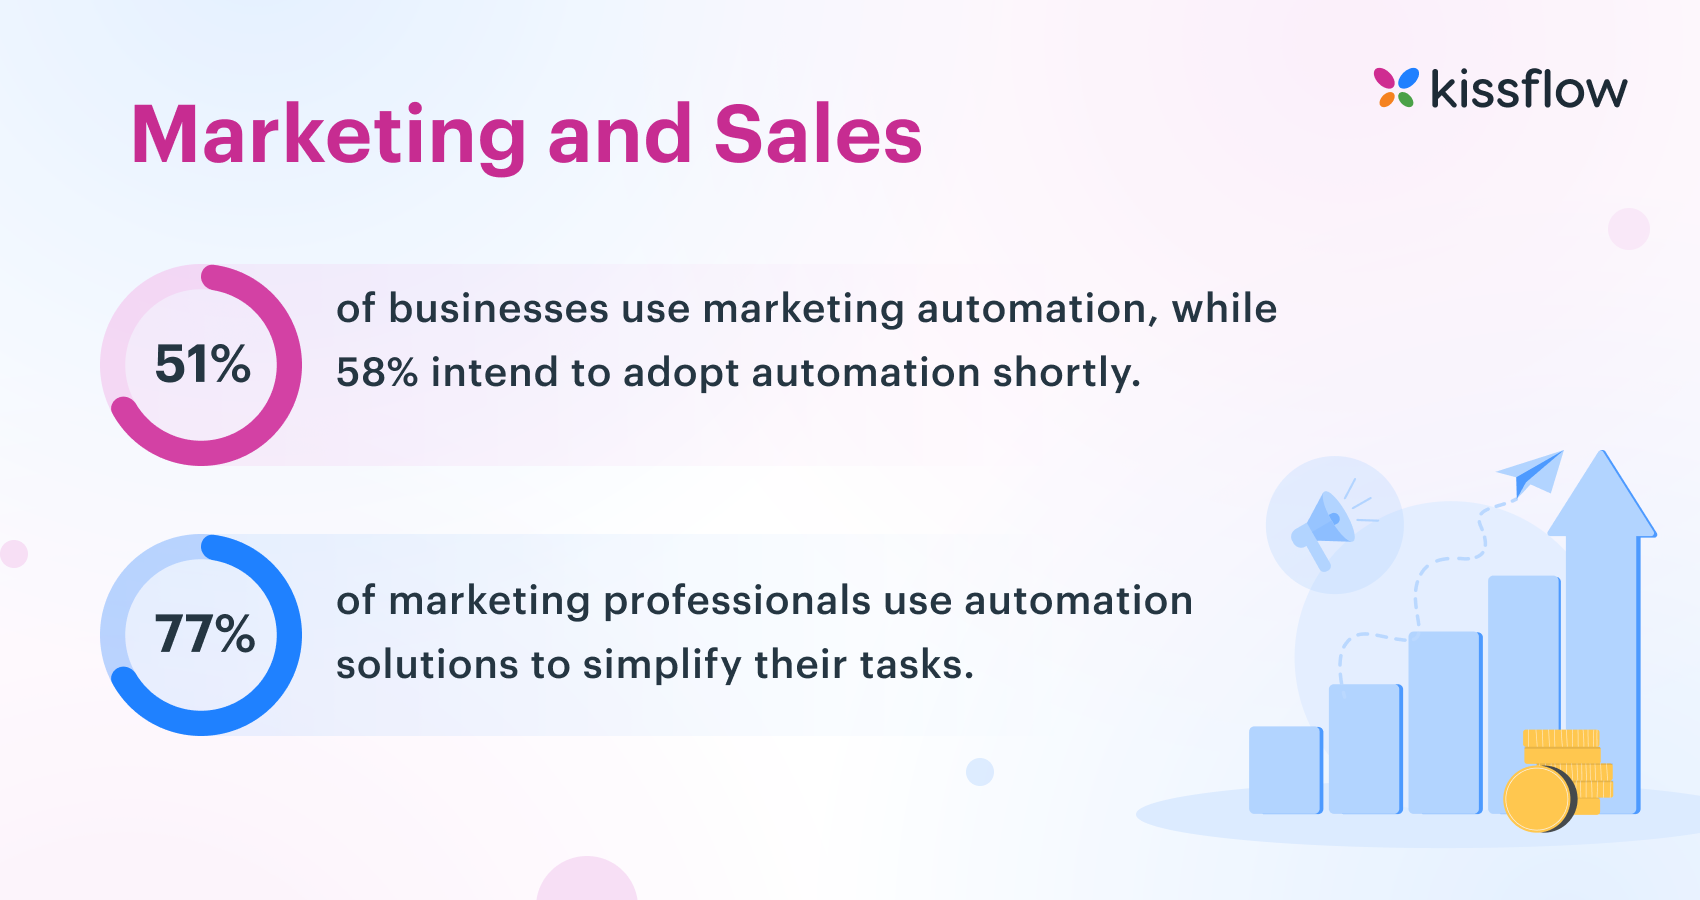 Workflow automation stats in marketing and sales